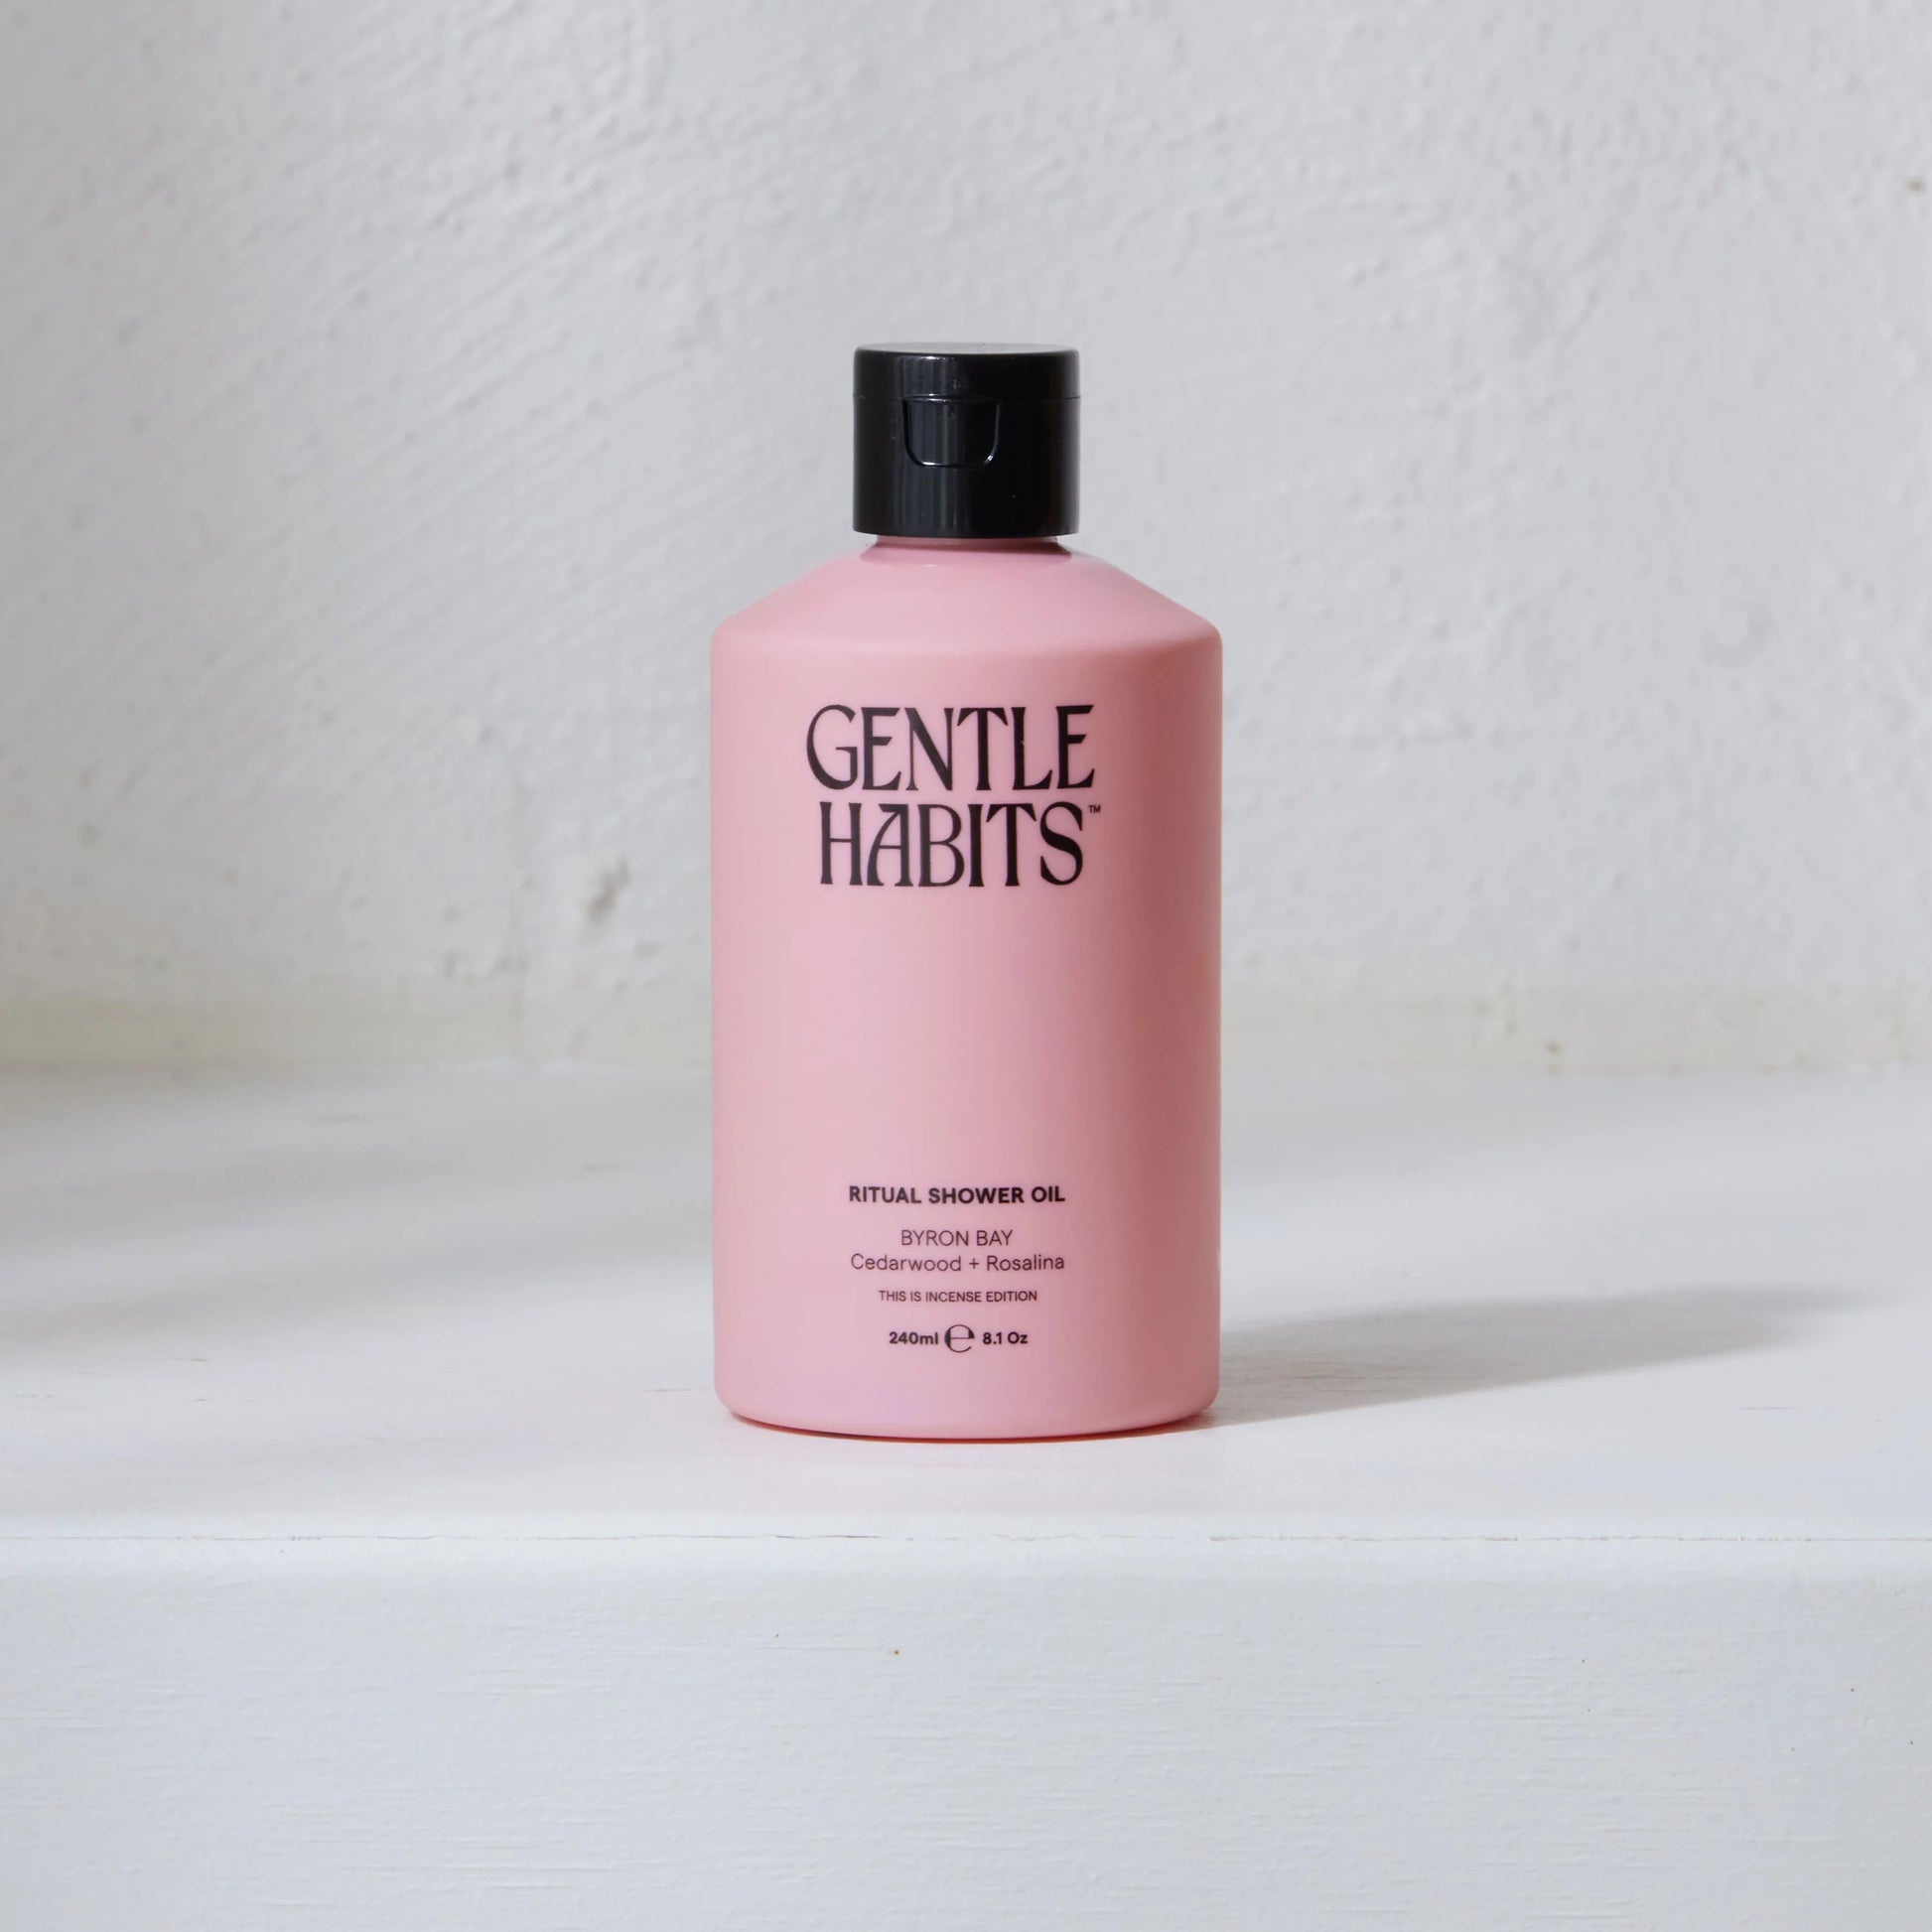 Gentle Habits Ritual Shower Oil Byron Bay, this is incense, the ivy plant studio